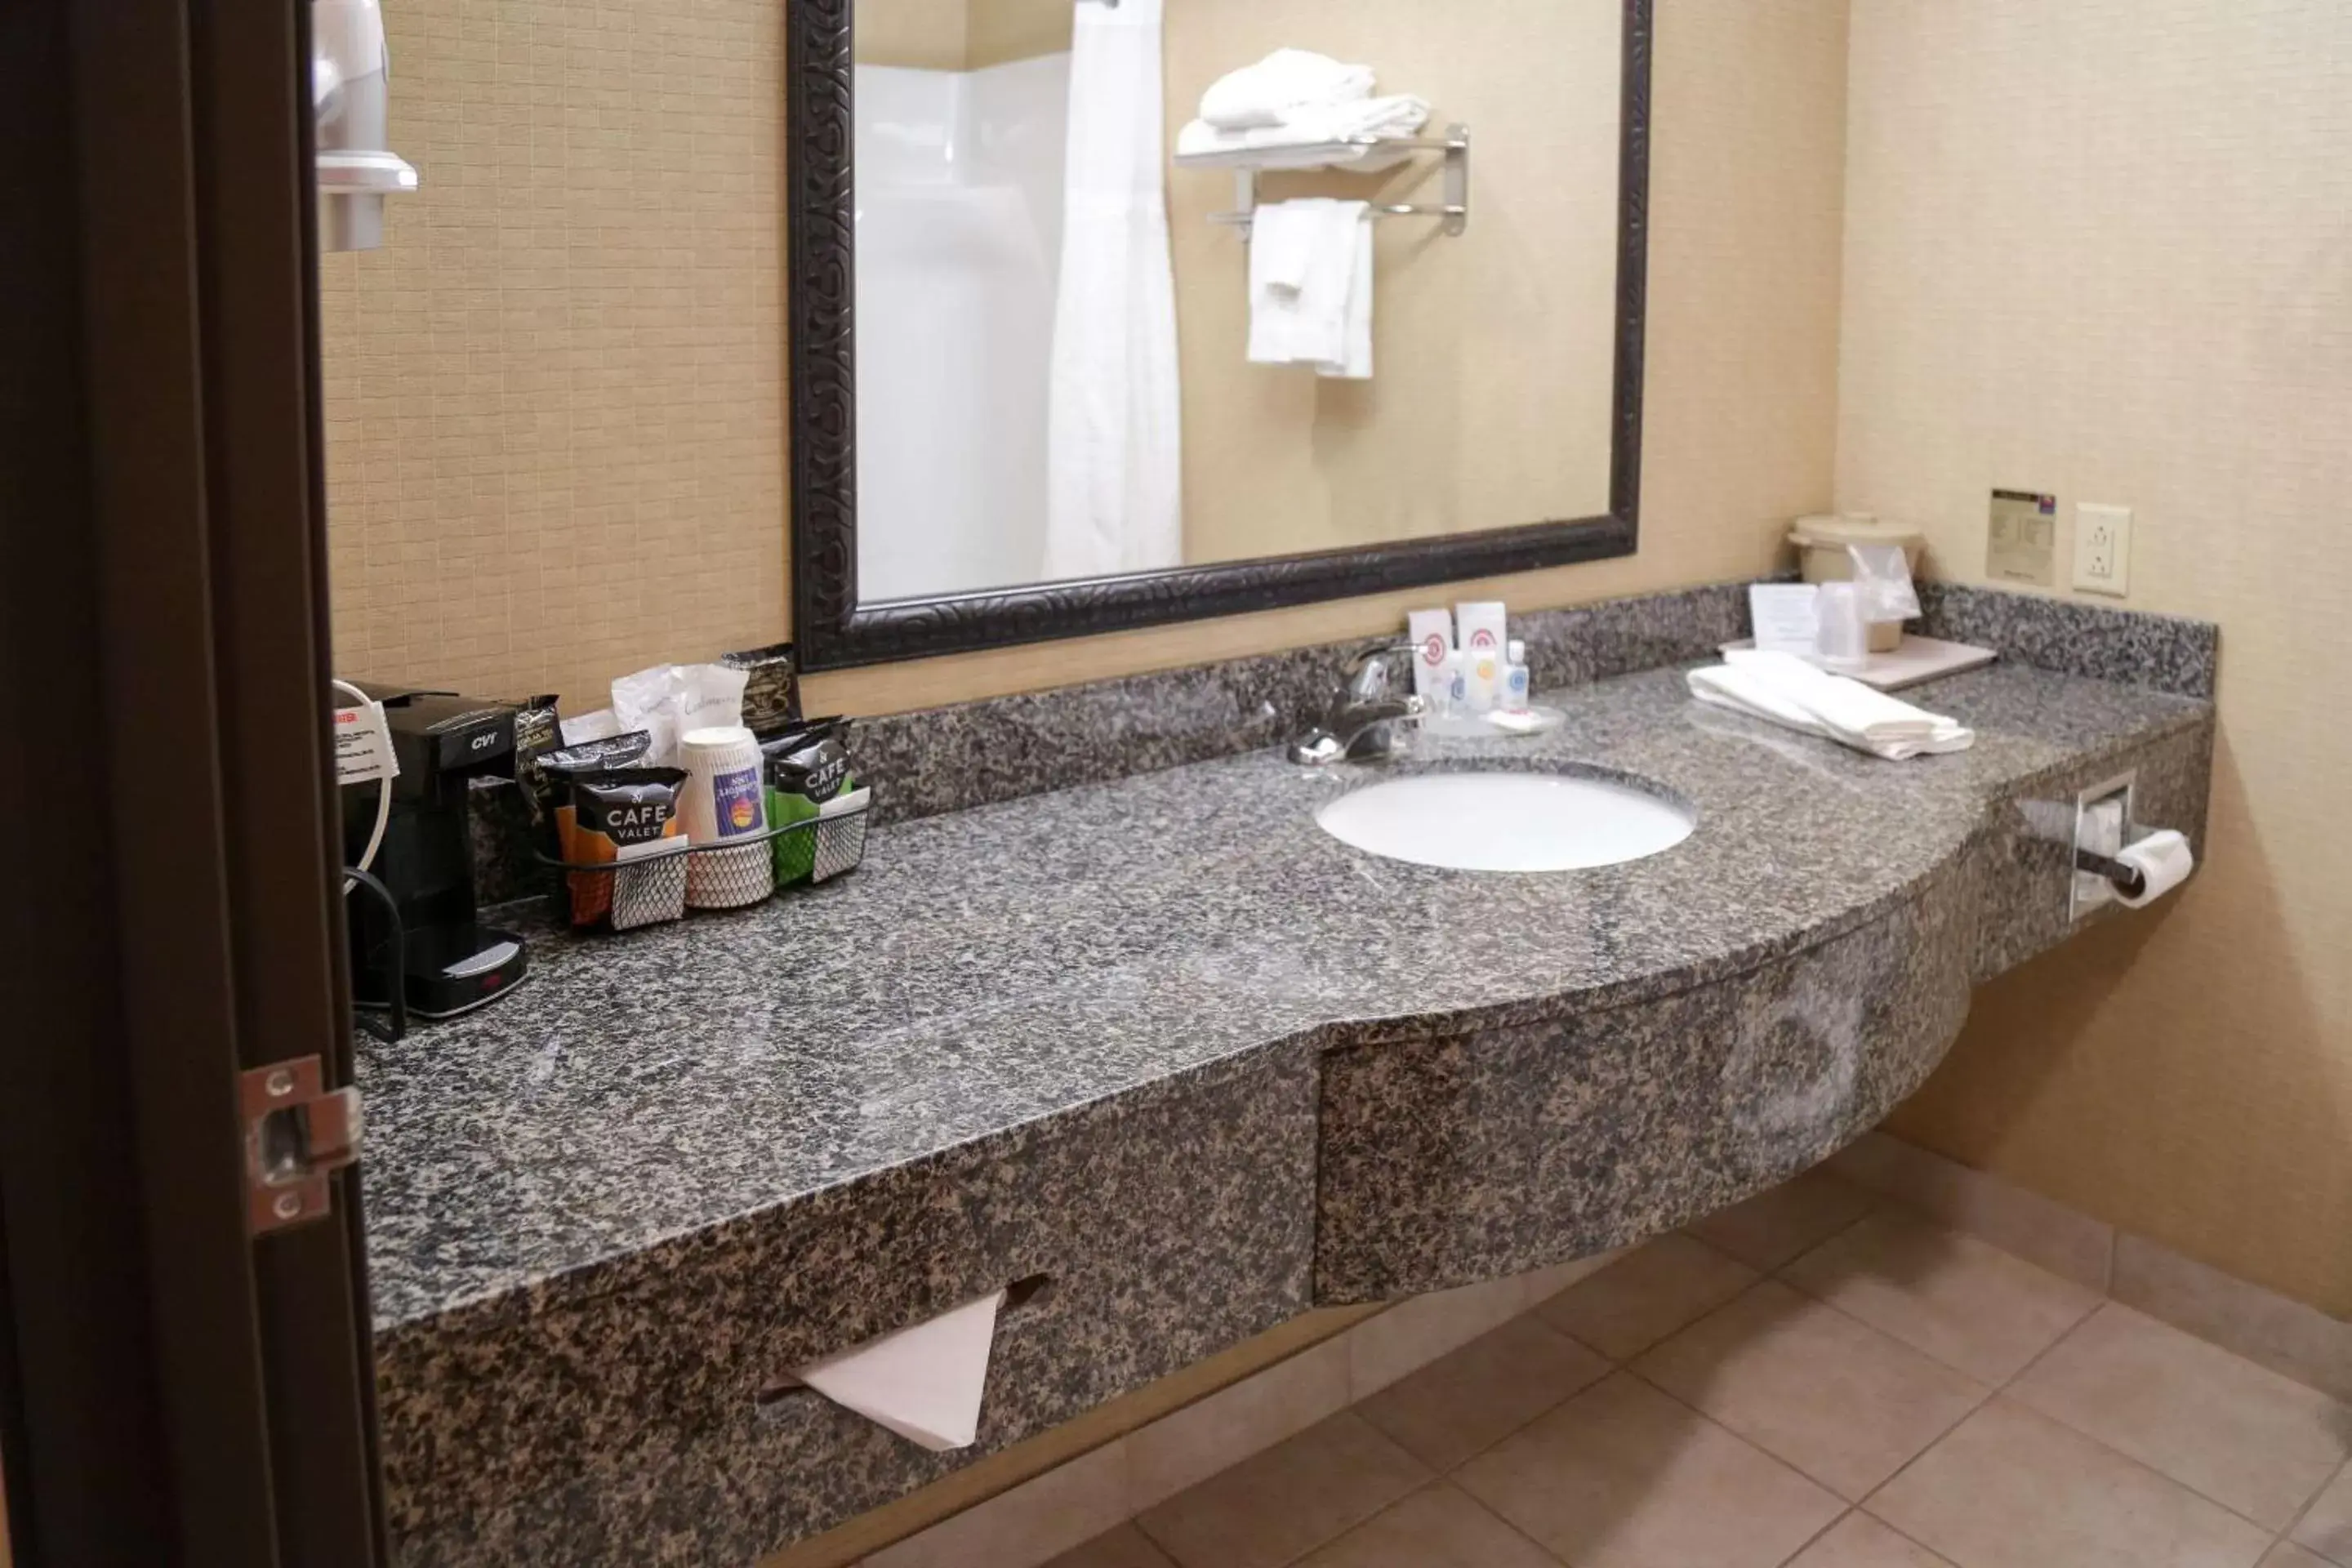 Bathroom in Comfort Inn & Suites Grinnell near I-80